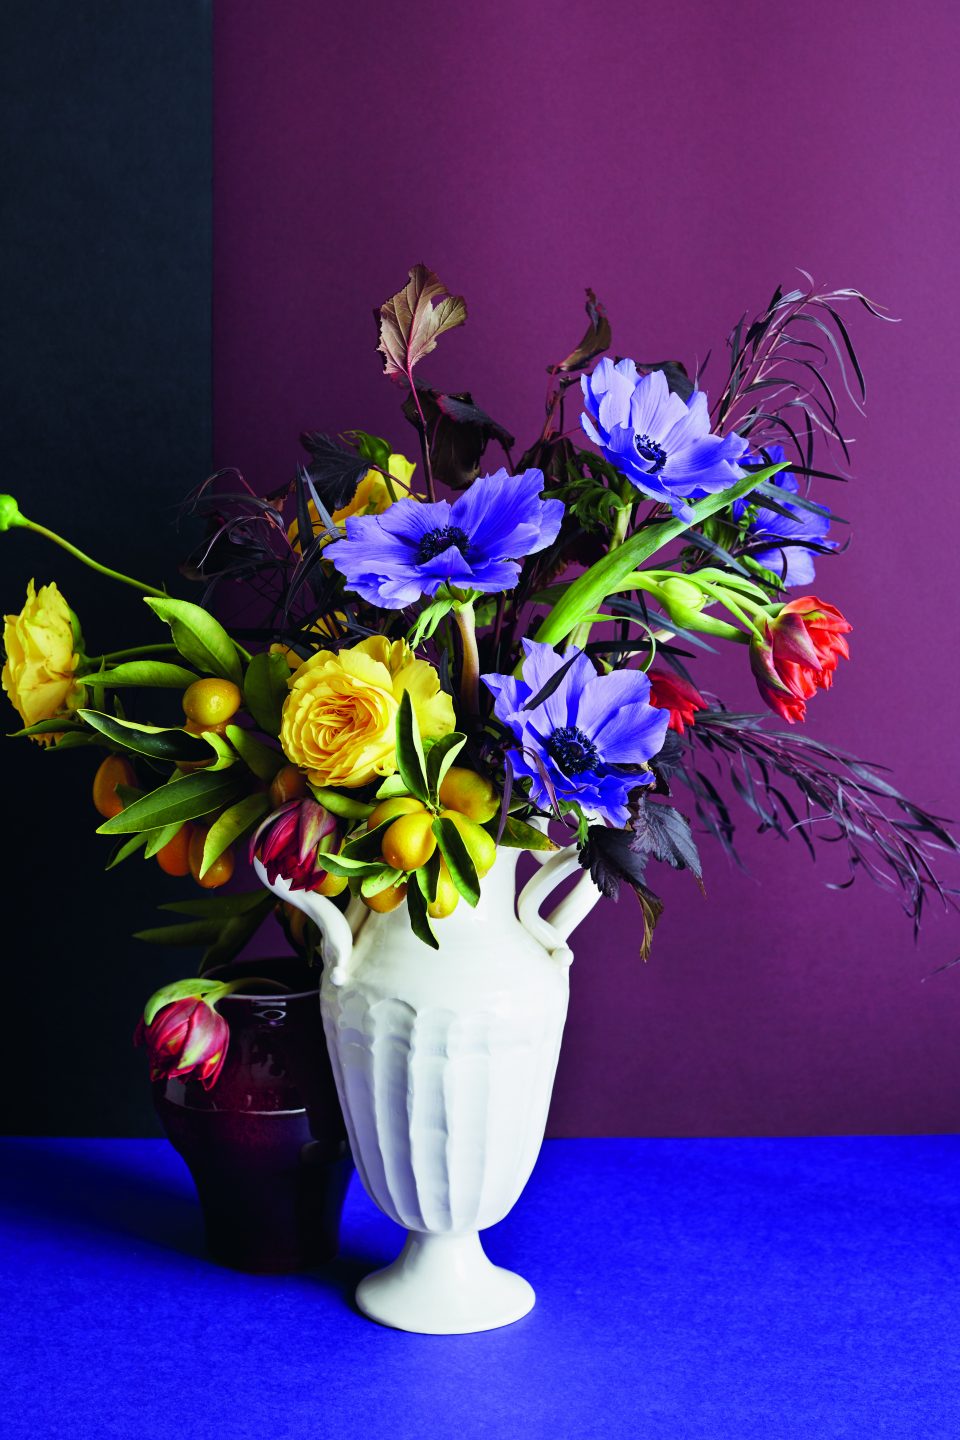 See How One Woman Magically Transforms the World’s Most Loved Artworks into Floral Arrangements